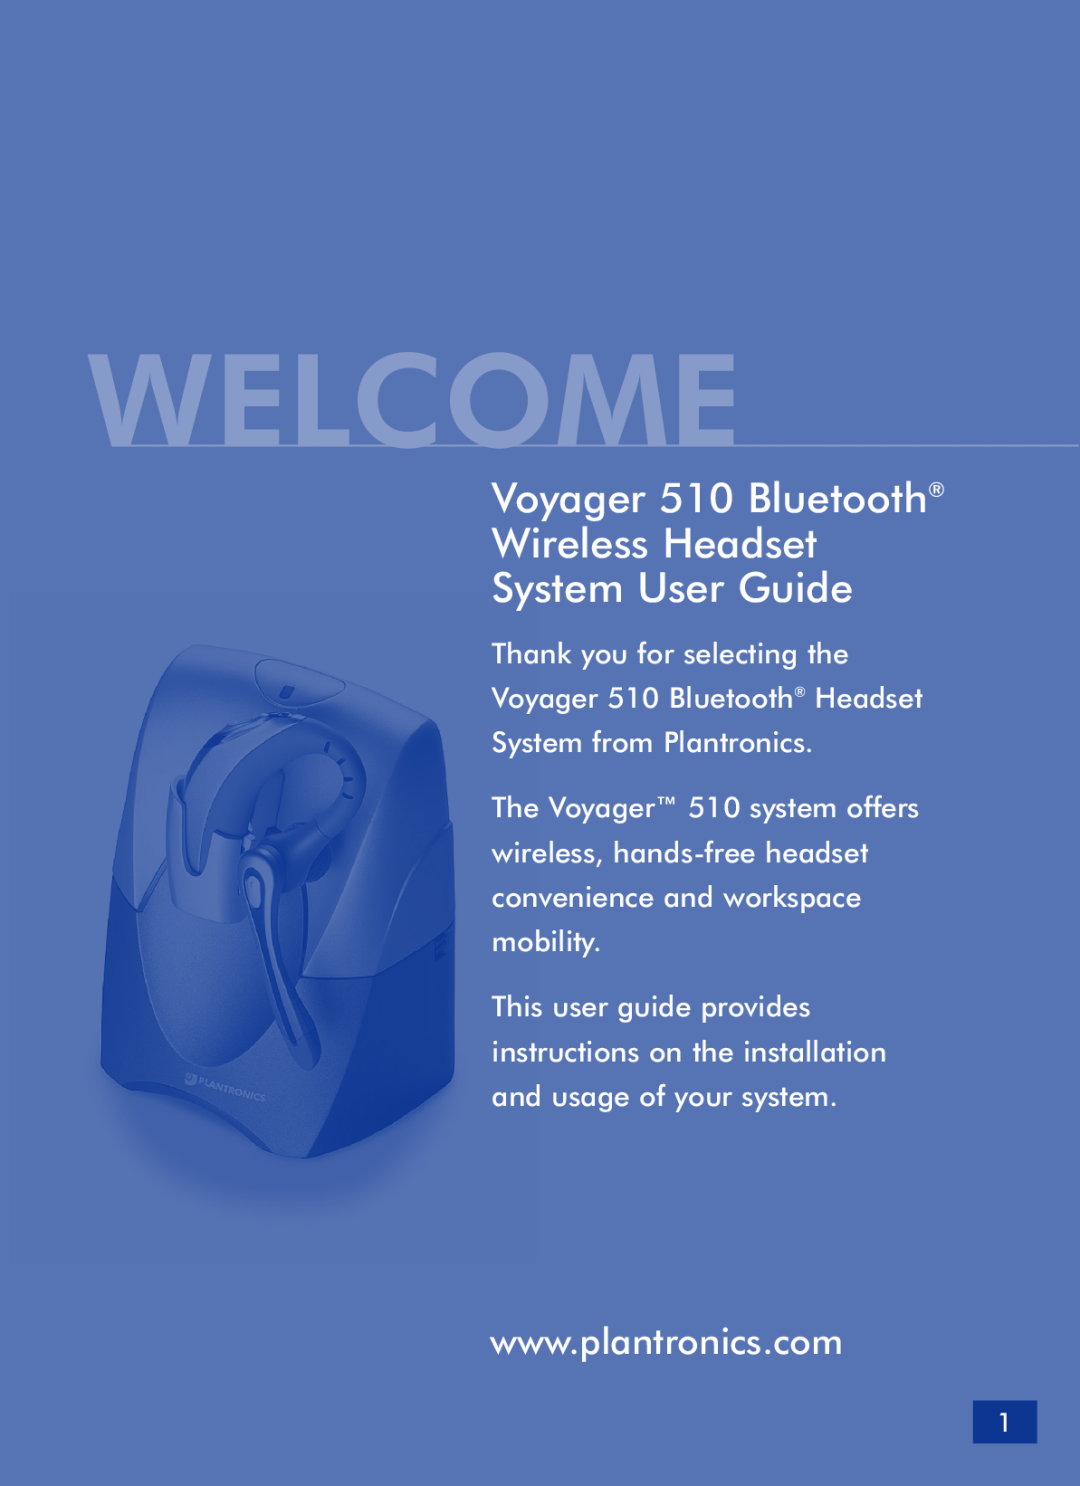 Plantronics manual Welcome, Voyager 510 Bluetooth Wireless Headset, System User Guide, Thank you for selecting the 